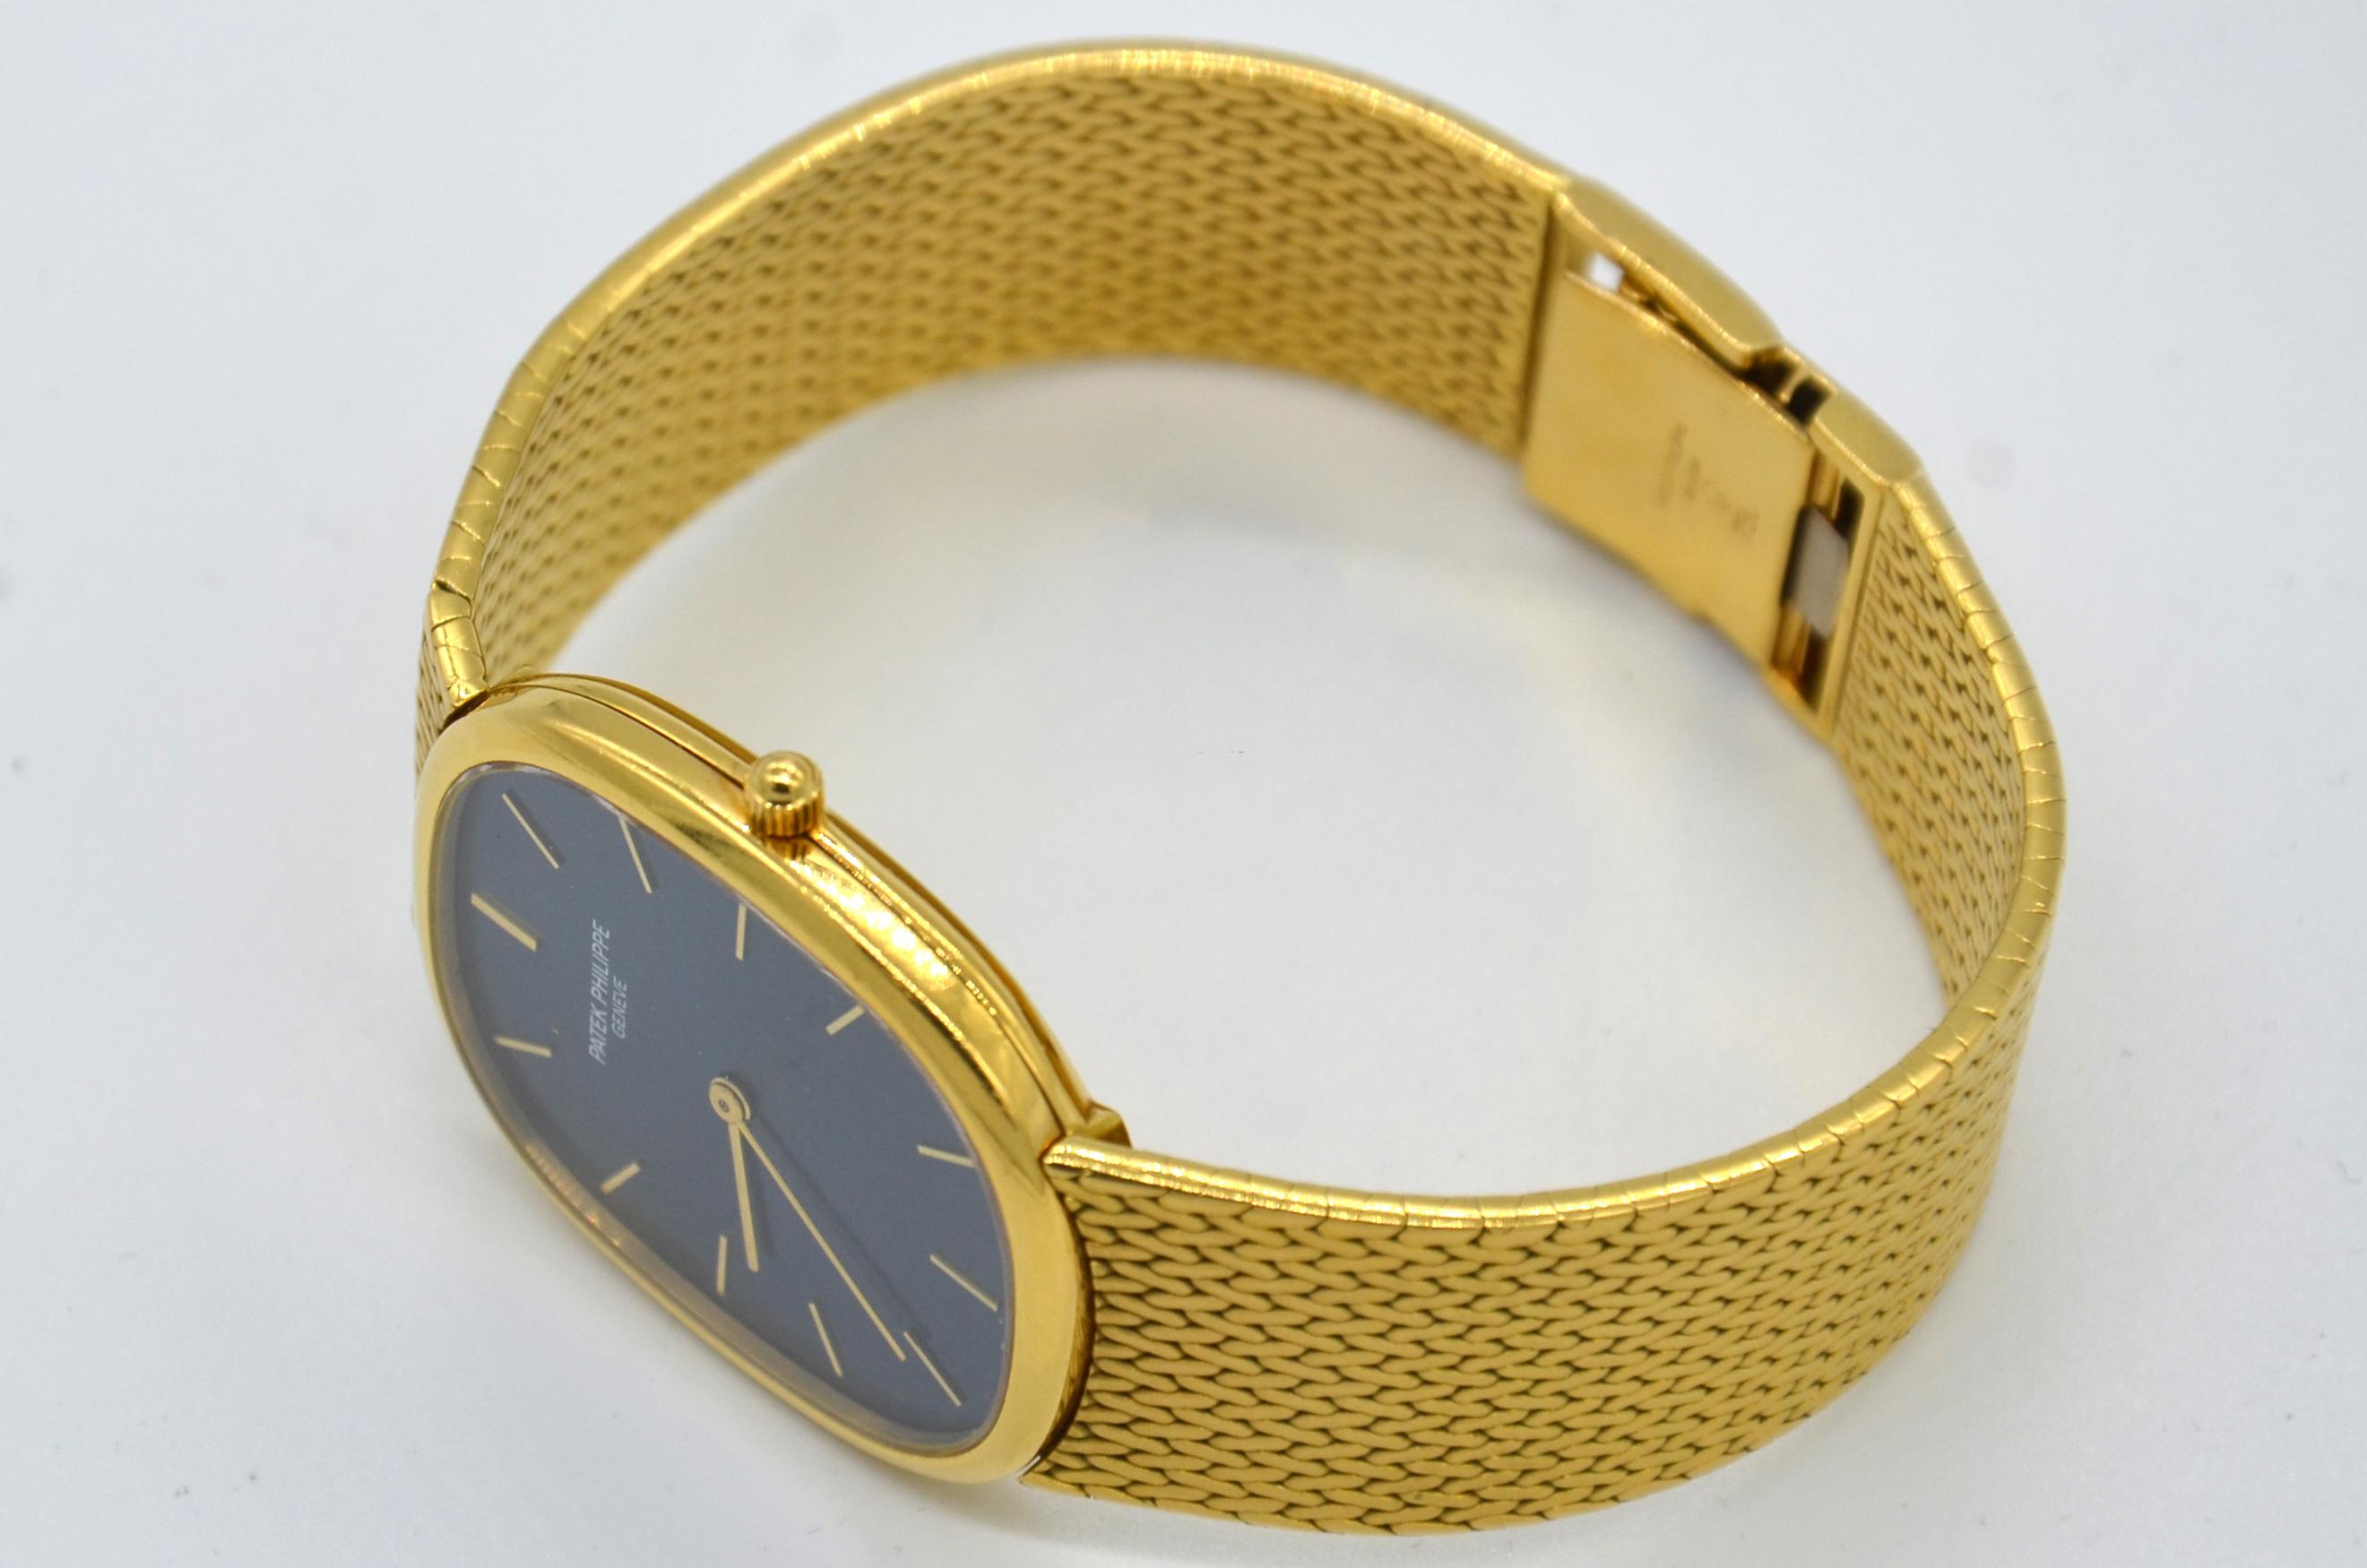 Patek Philippe Golden Ellipse, Ref. 3738  In Excellent Condition For Sale In New York, NY